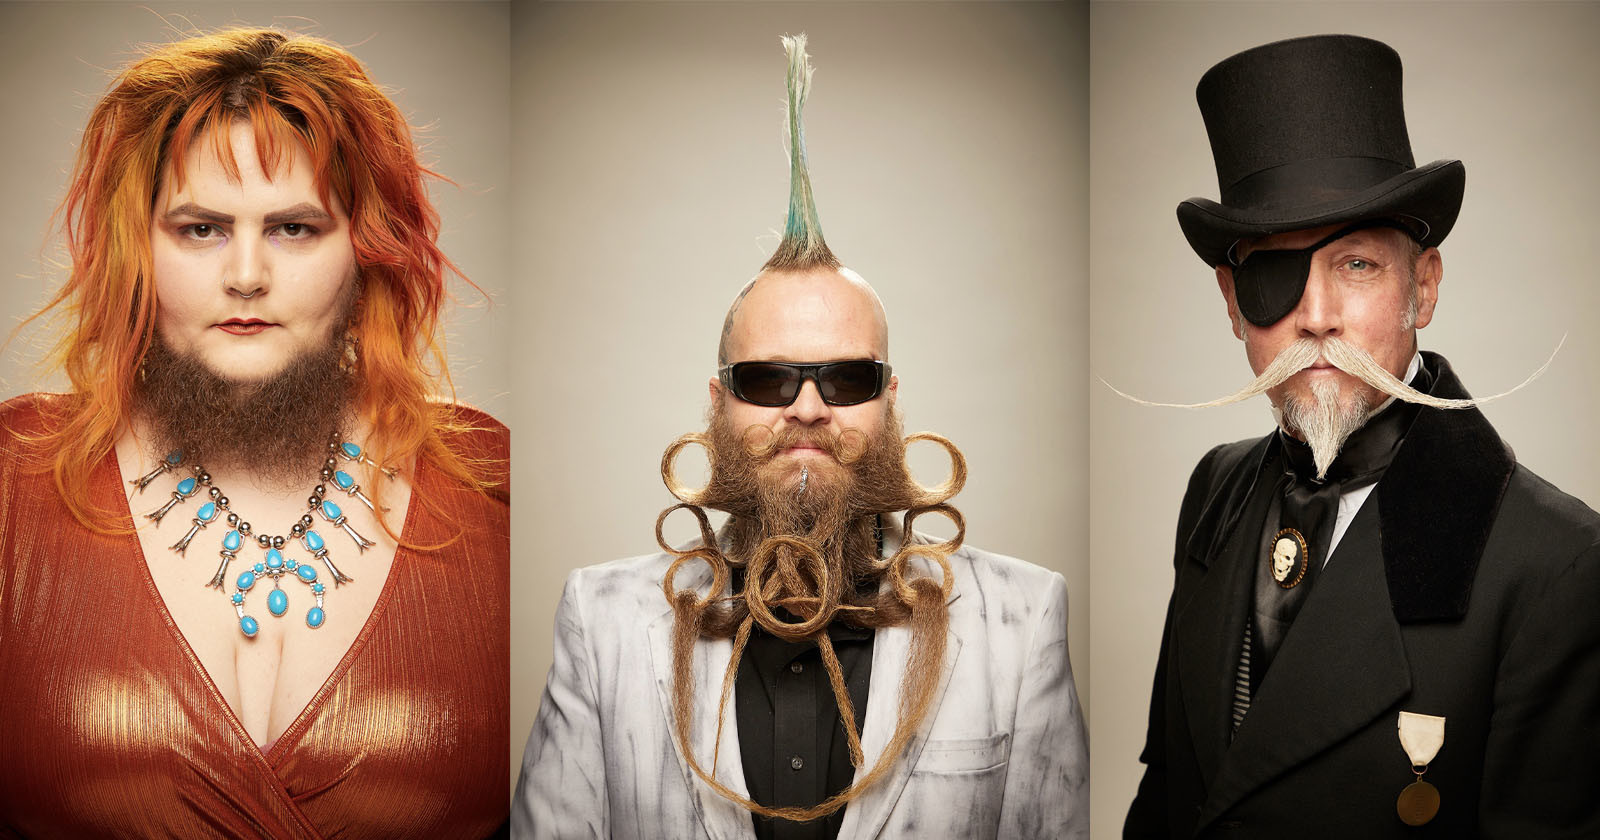 Fantastic Photos From the 2022 Beard and Moustache Championships